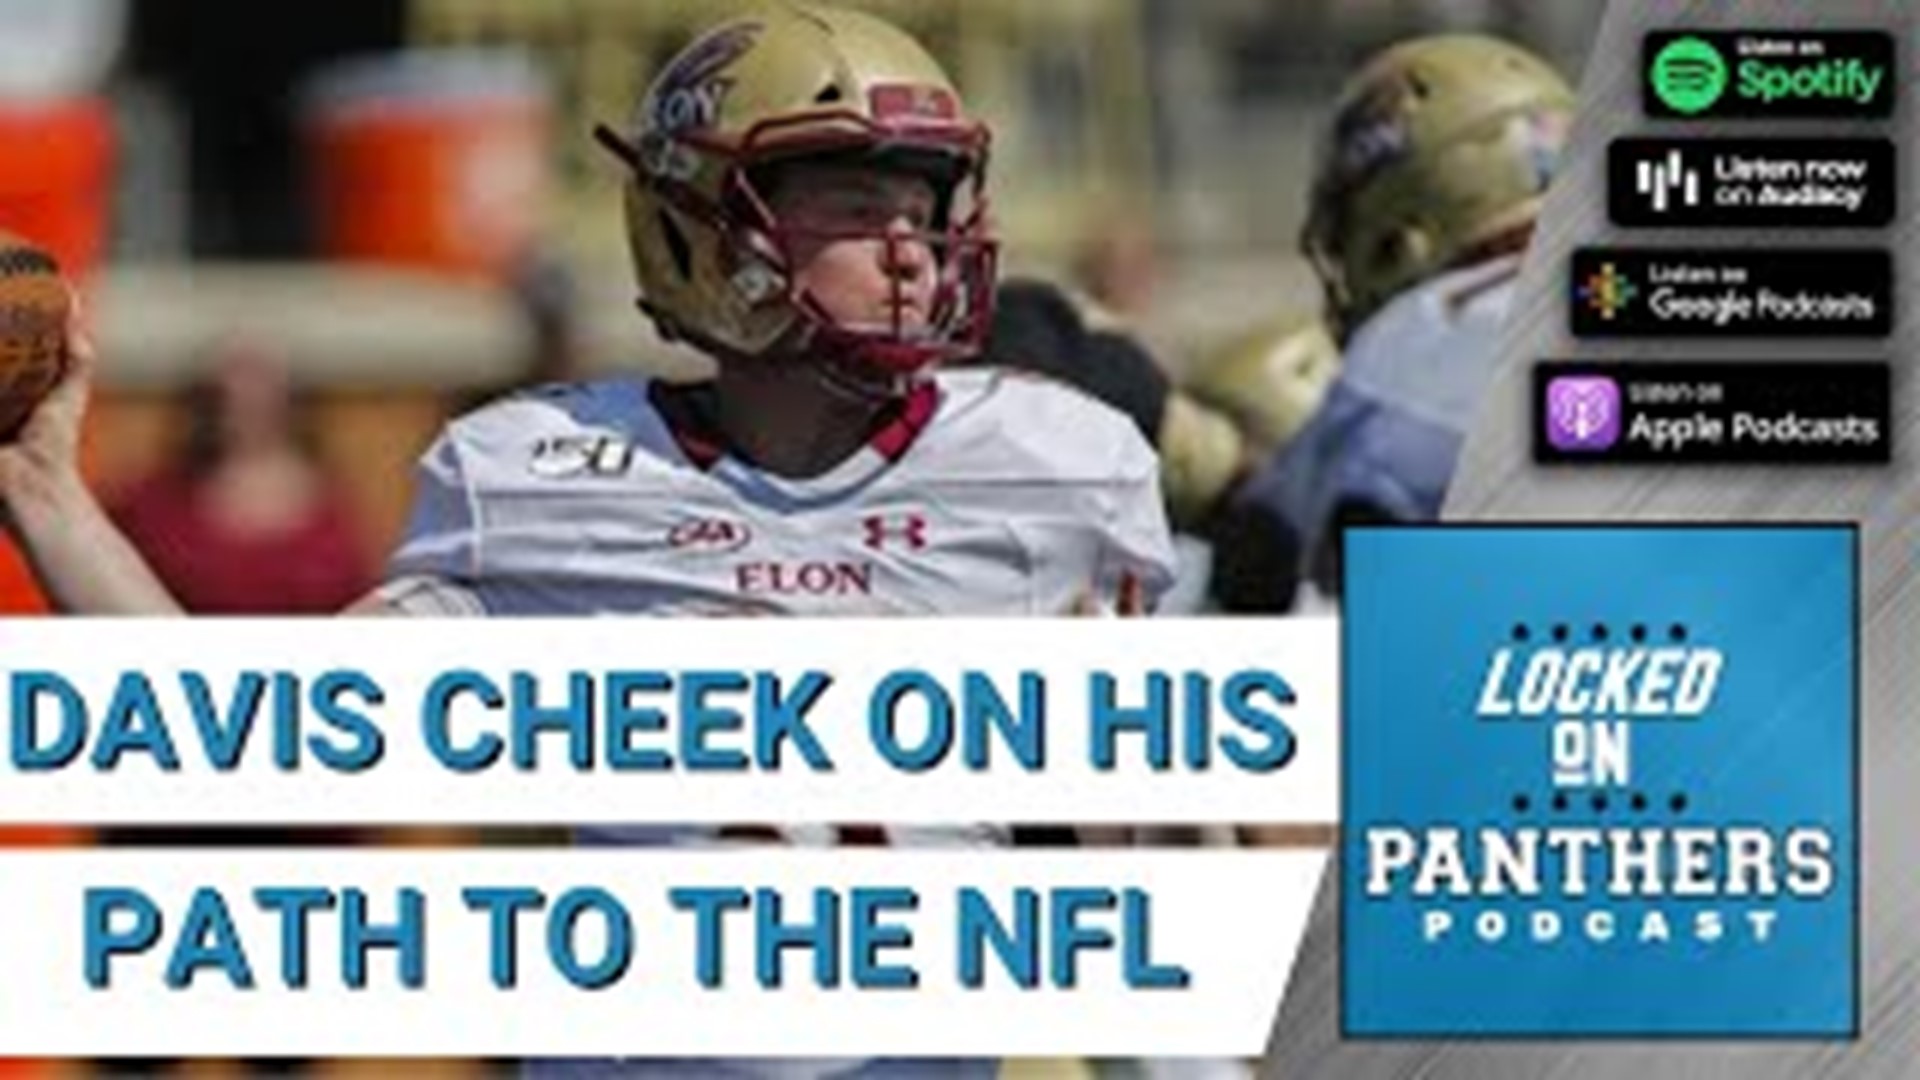 Davis Cheek joined Julian Council to discuss his path to the NFL, and highlights his early memories as a Panthers fan, and his goals as he enters the QB room.